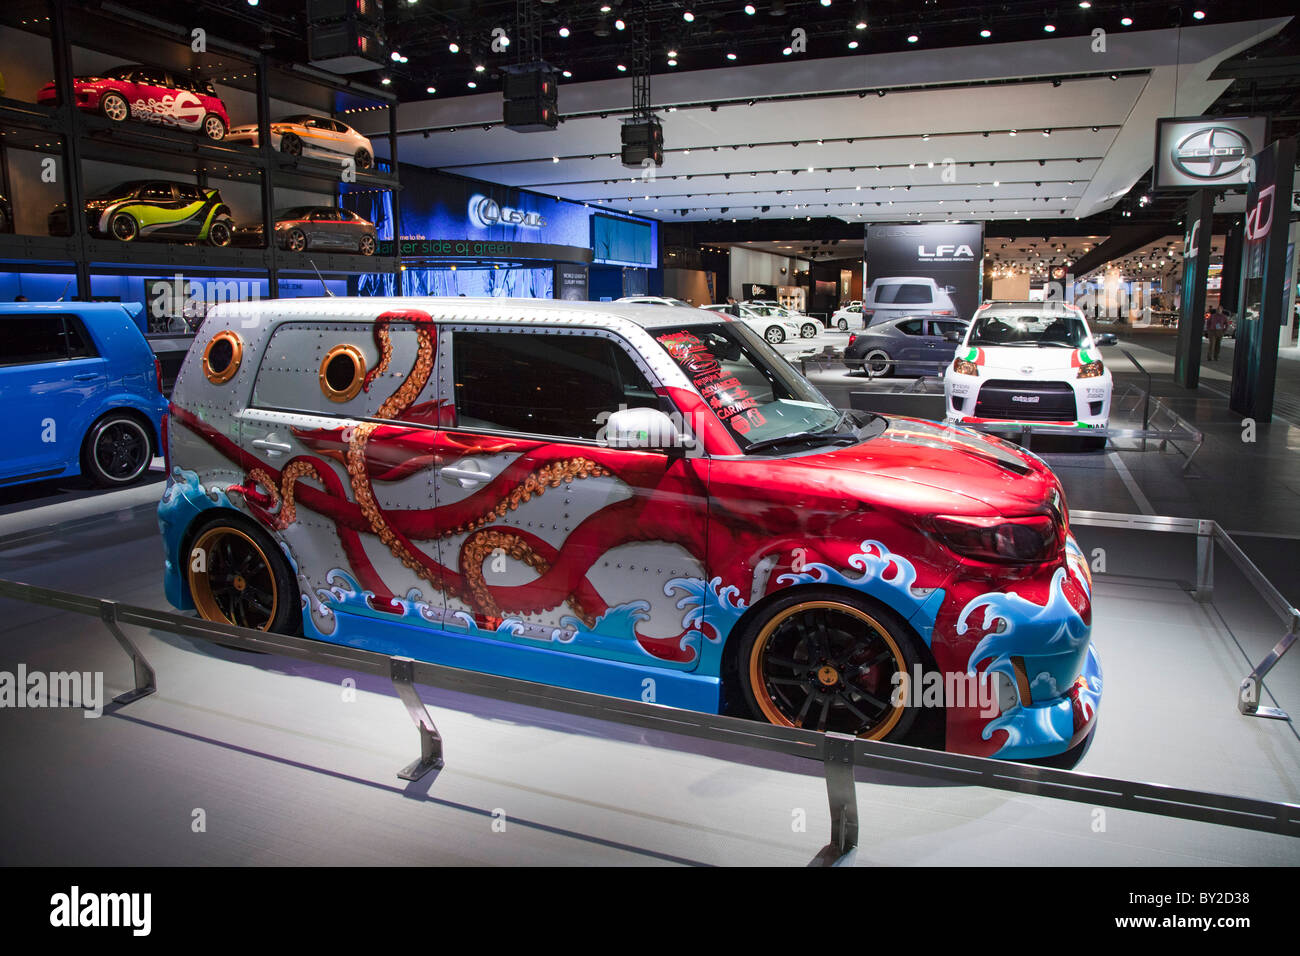 Detroit, Michigan - The Squid, a modified Scion xB, on display at the North American International Auto Show. Stock Photo